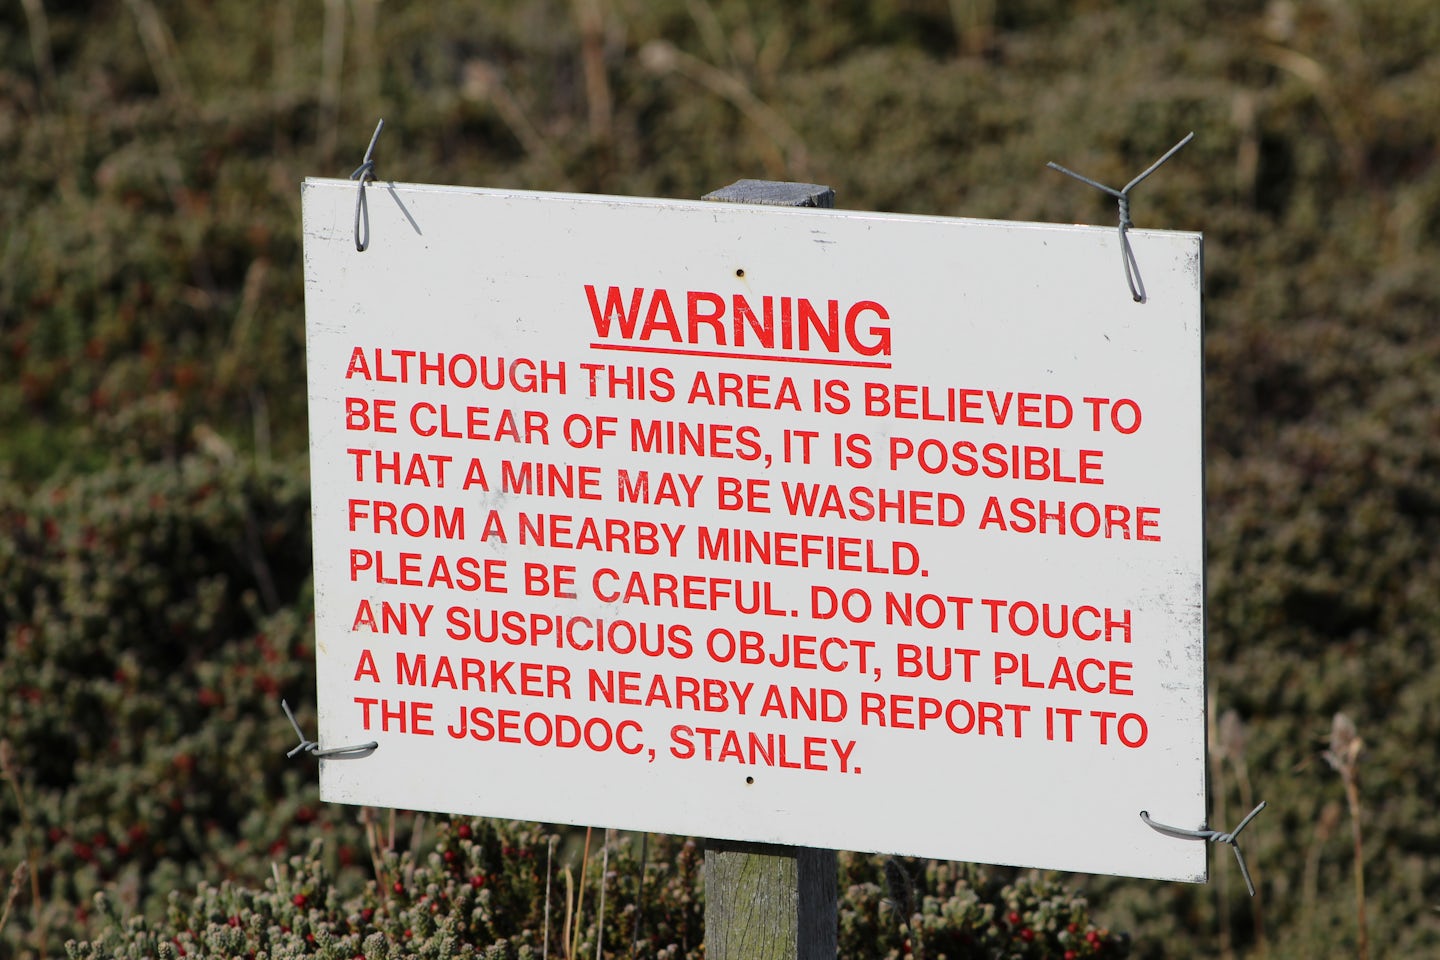 The Mine Field warning at Gypsy Cove, Stanley, Falkland Islands.